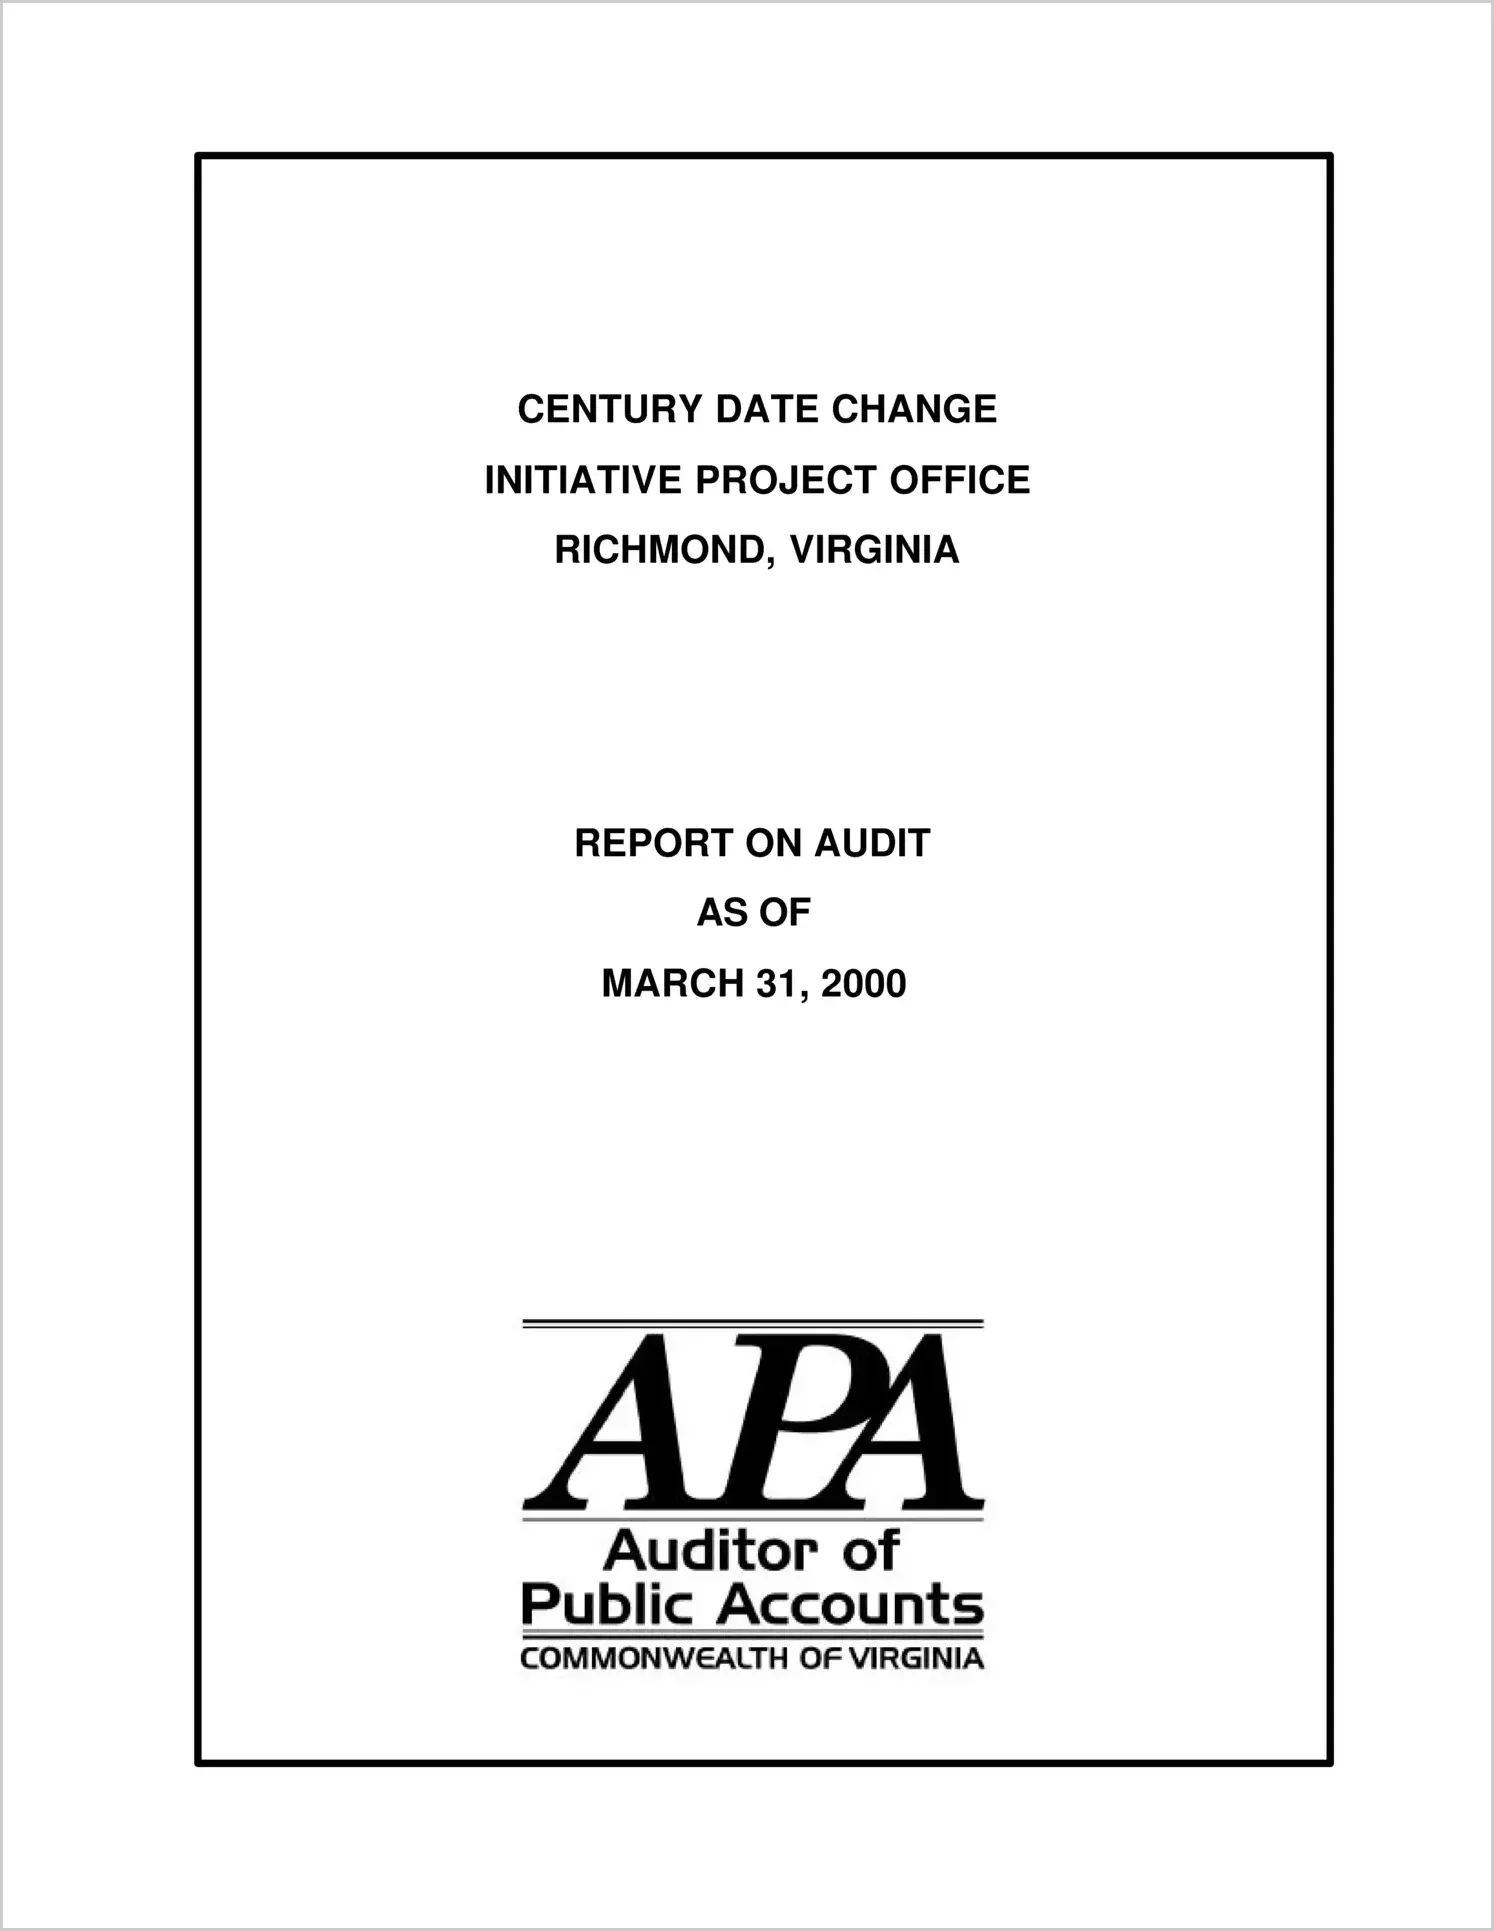 Special ReportCentury Date Change Initiative Project Office(Report Date: 12/8/2000)